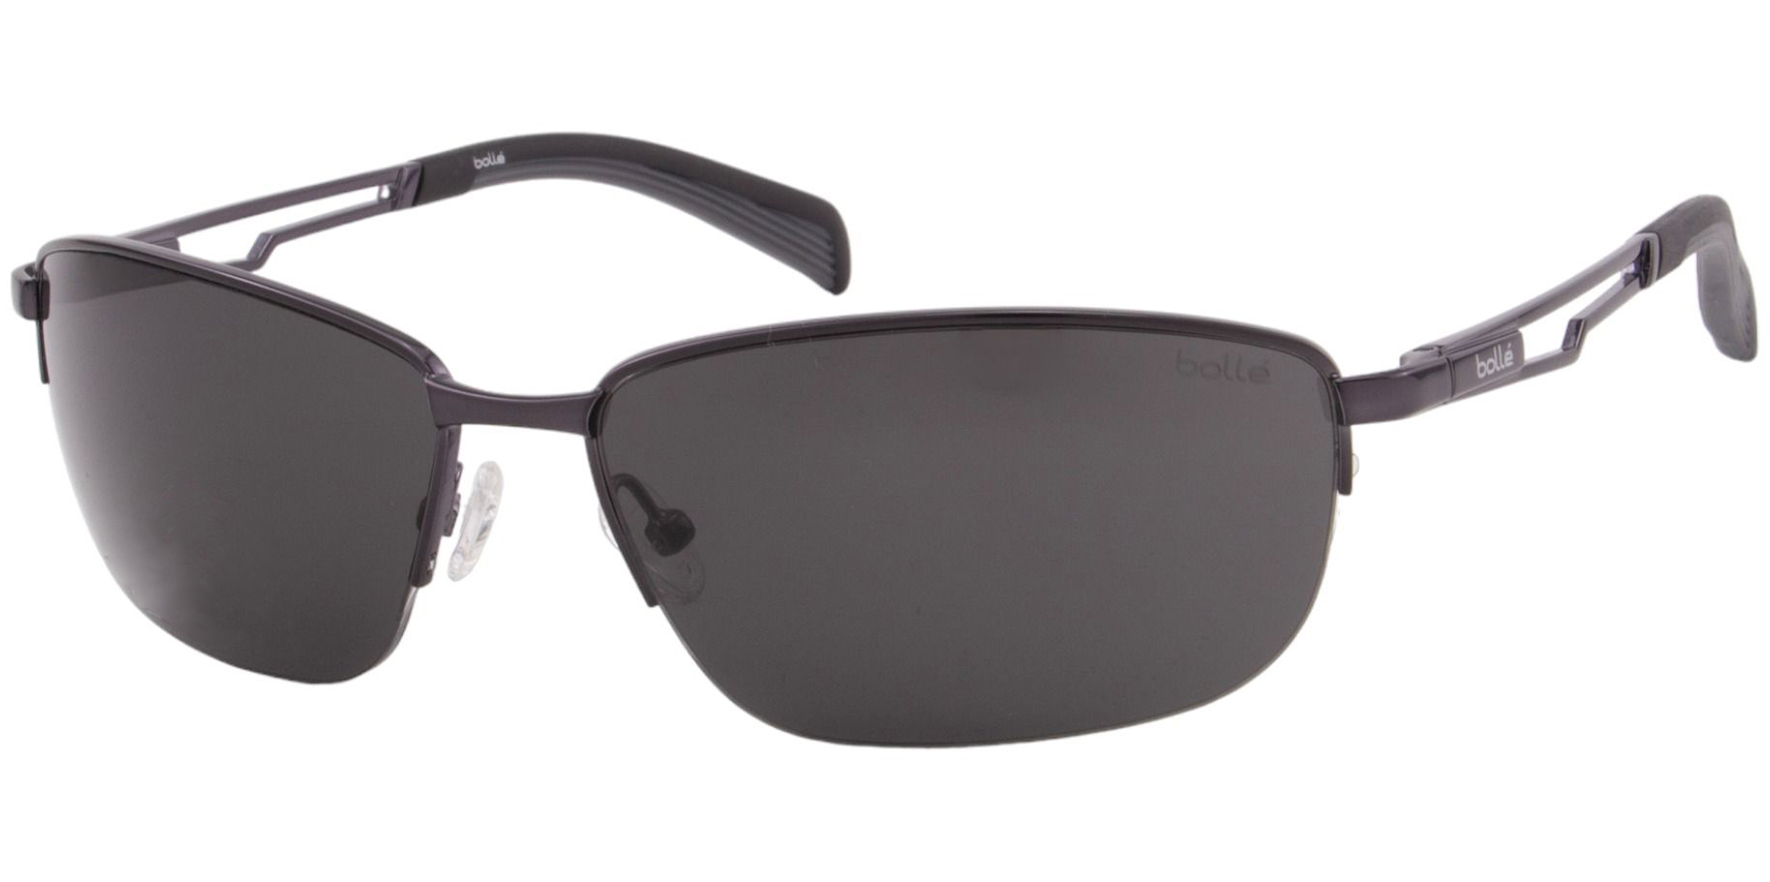 Bolle Sunglasses (various styles) from $26 + Free Shipping